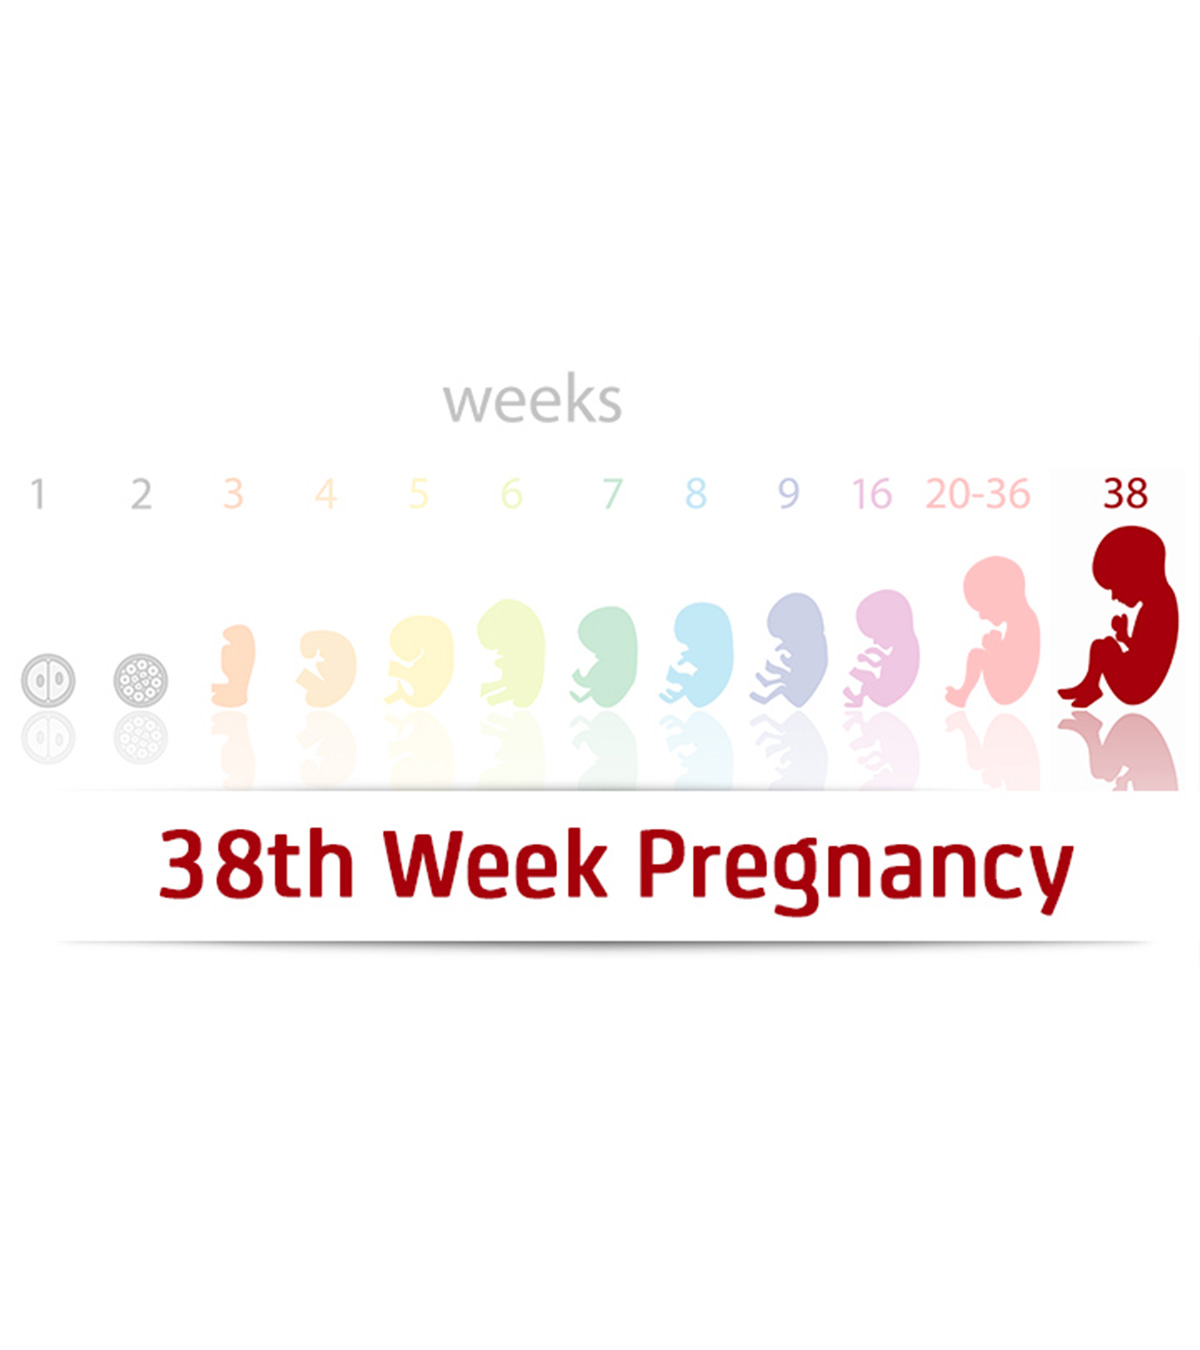 38th Week Pregnancy: Symptoms, Baby Development, And Tips